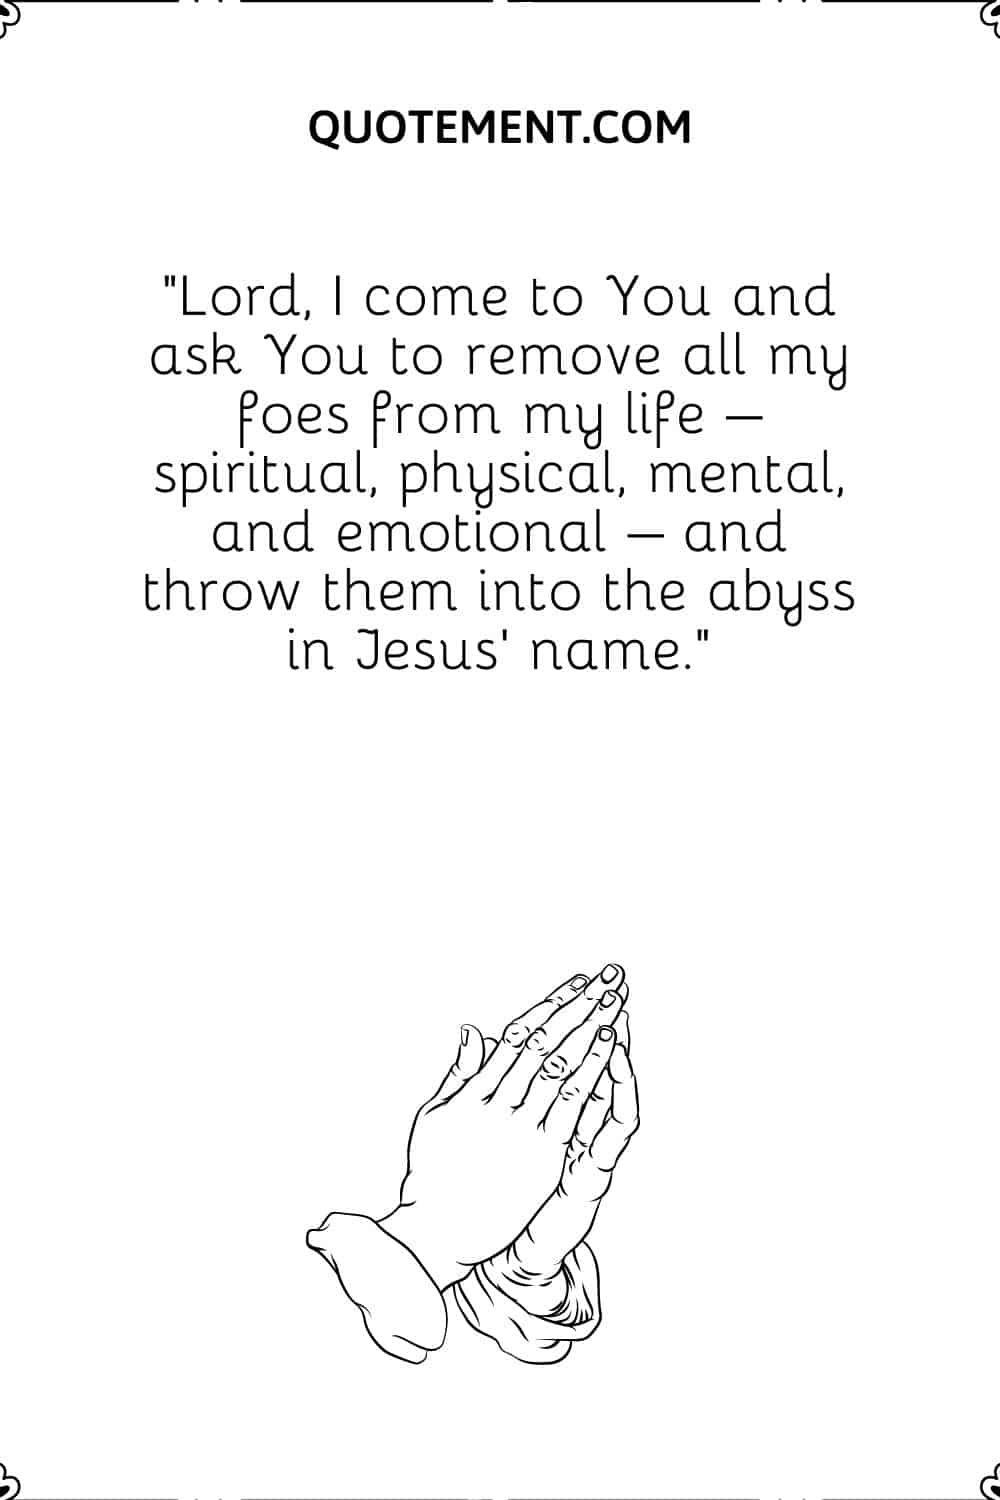 Lord, I come to You and ask You to remove all my foes from my life – spiritual, physical, mental, and emotional – and throw them into the abyss in Jesus’ name